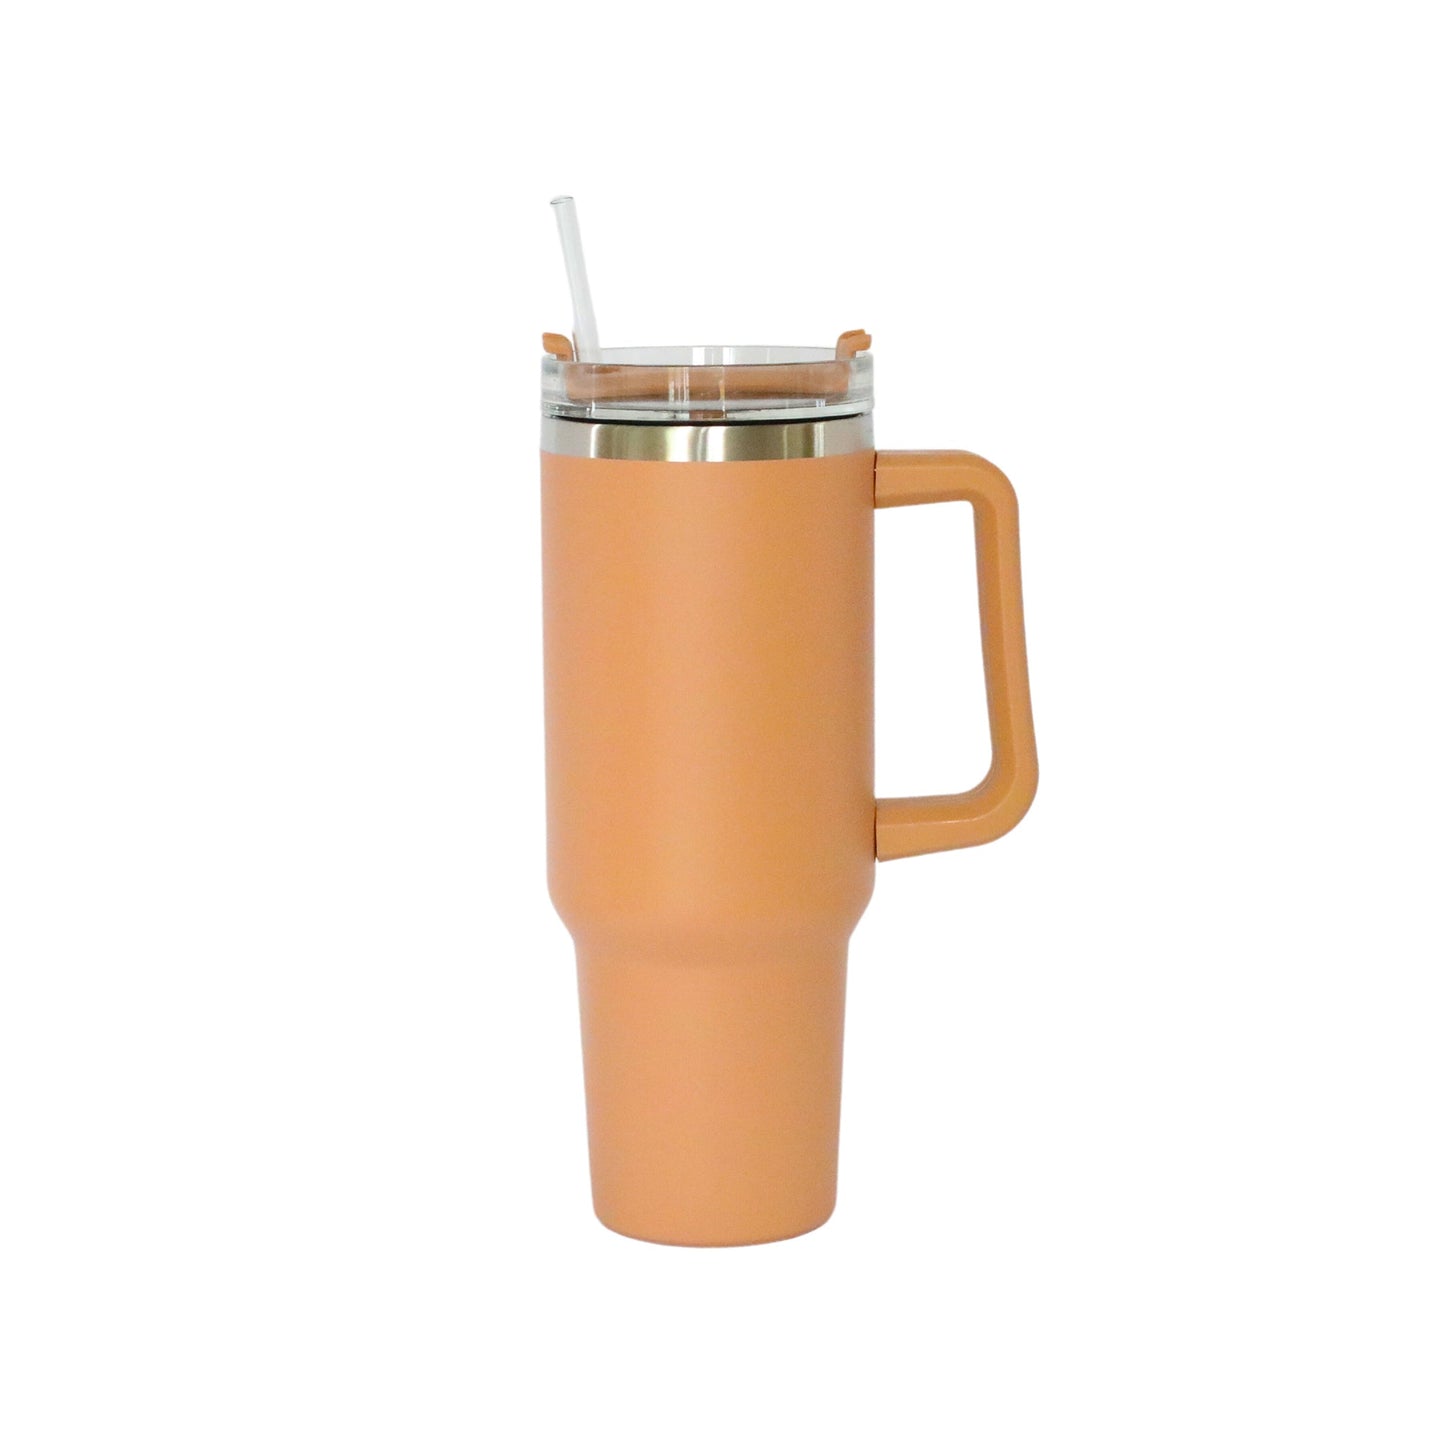 40 Oz Stainless Steel Tumbler with Handle & Straw - Clay by Creative Gifts